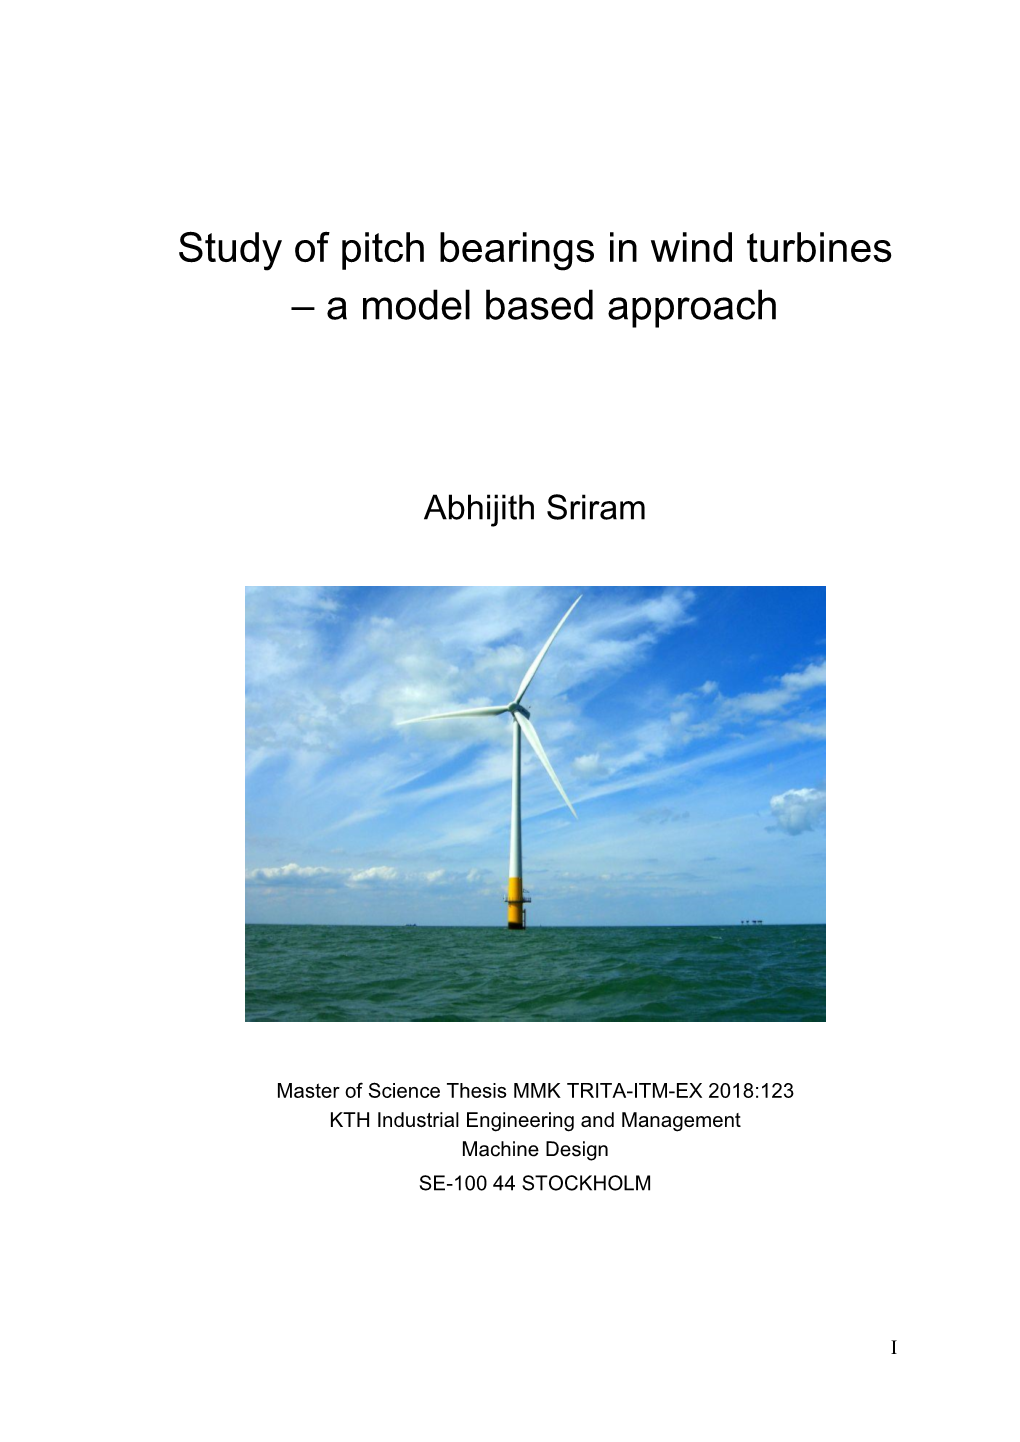 Study of Pitch Bearings in Wind Turbines – a Model Based Approach